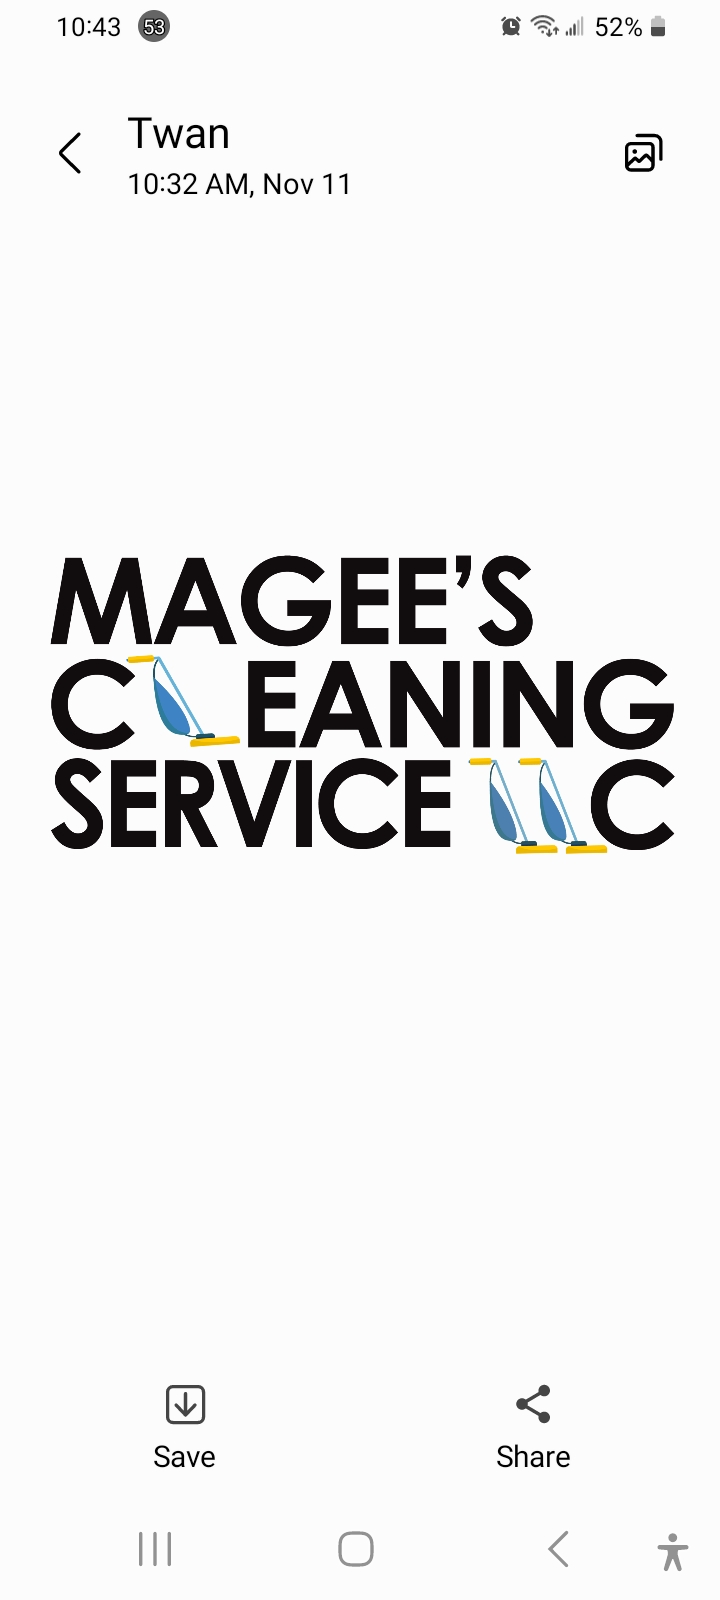 MAGEE'S CLEANING SERVICE LLC Logo